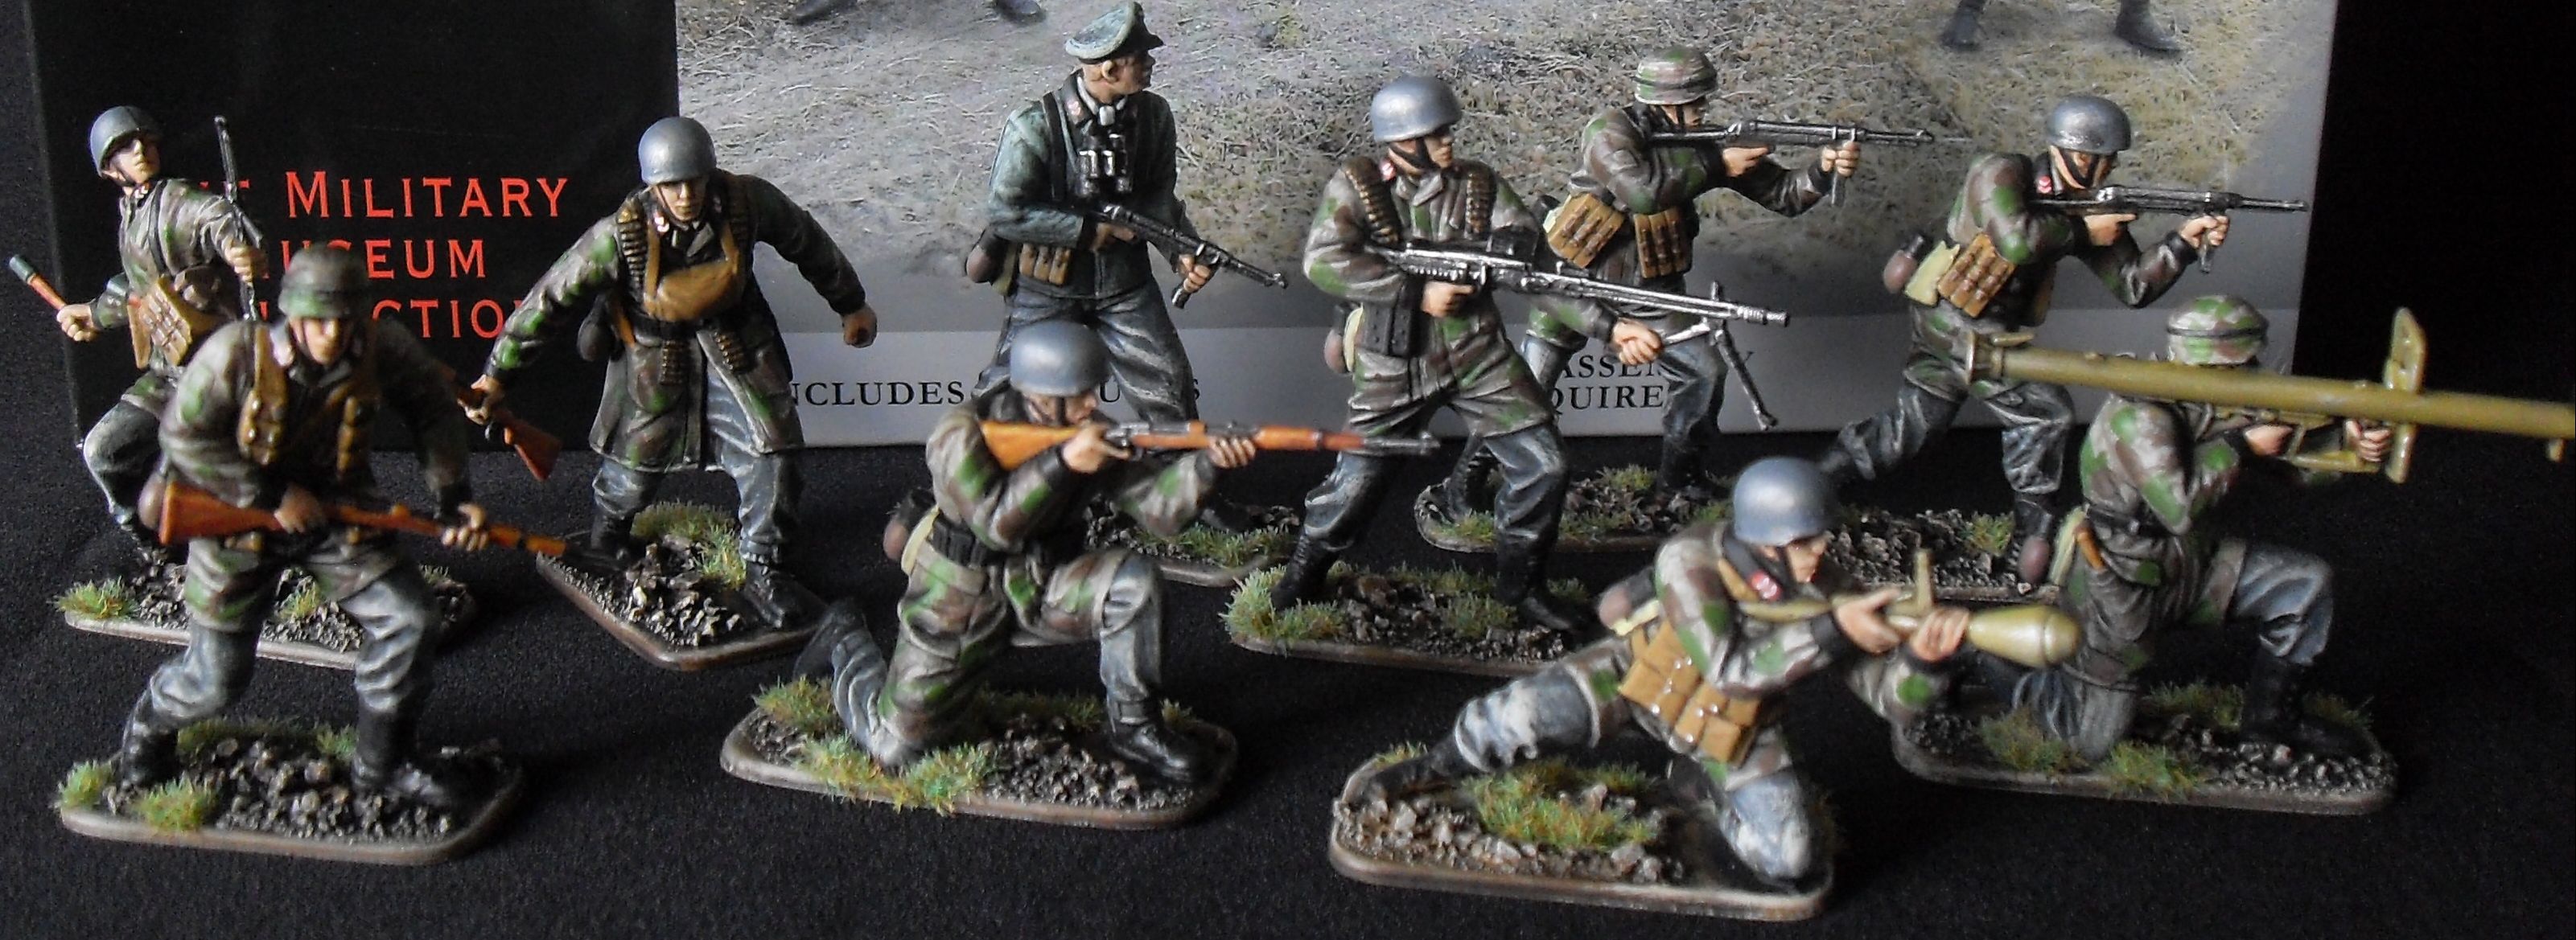 54mm model soldiers